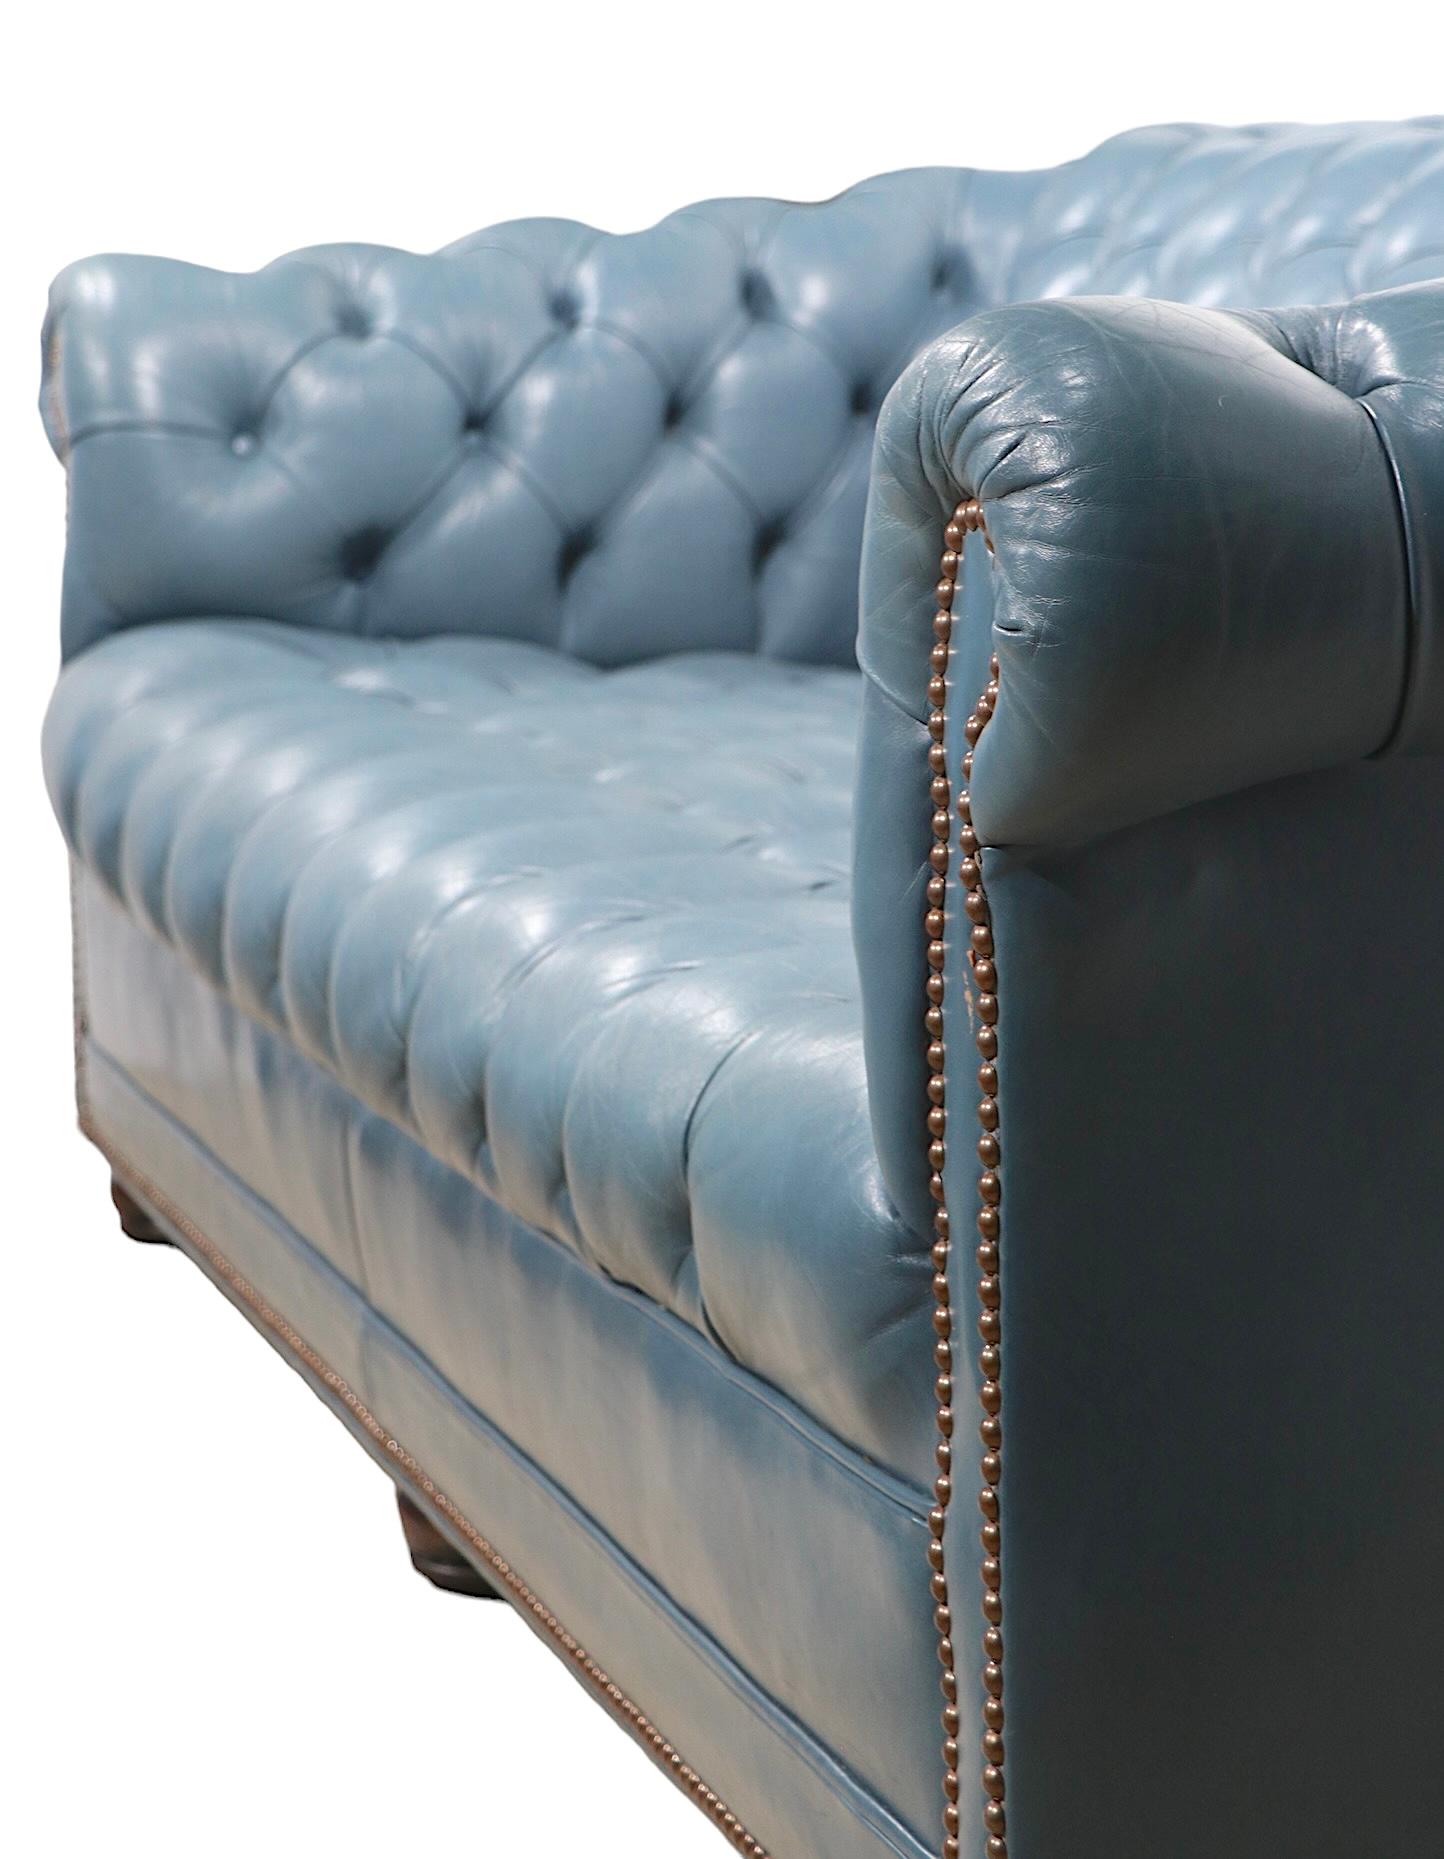 Chic, voguish and sophisticated  Chesterfield sofa  in intriguing French Blue tufted leather. with solid wood bun feet.  The sofa is in very good, original, clean and ready to use condition, showing only light cosmetic wear, normal and consistent